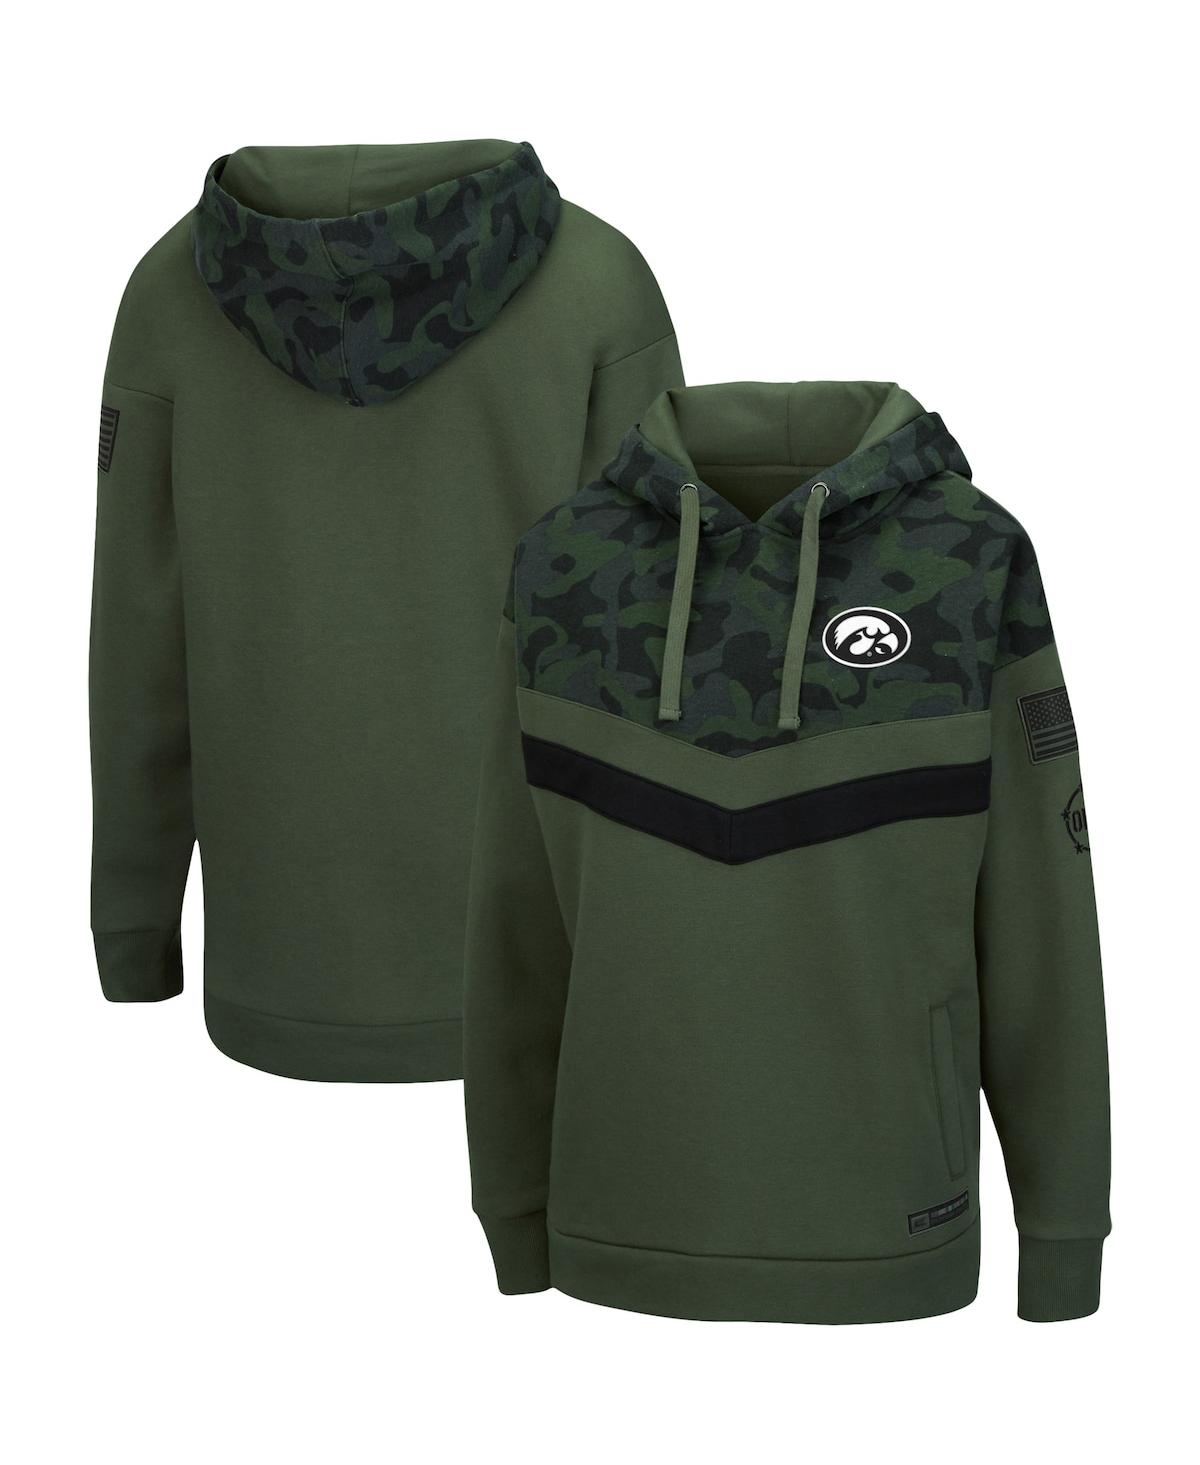 Women's Colosseum Olive, Camo Iowa Hawkeyes Oht Military-Inspired Appreciation Extraction Chevron Pullover Hoodie - Olive, Camo